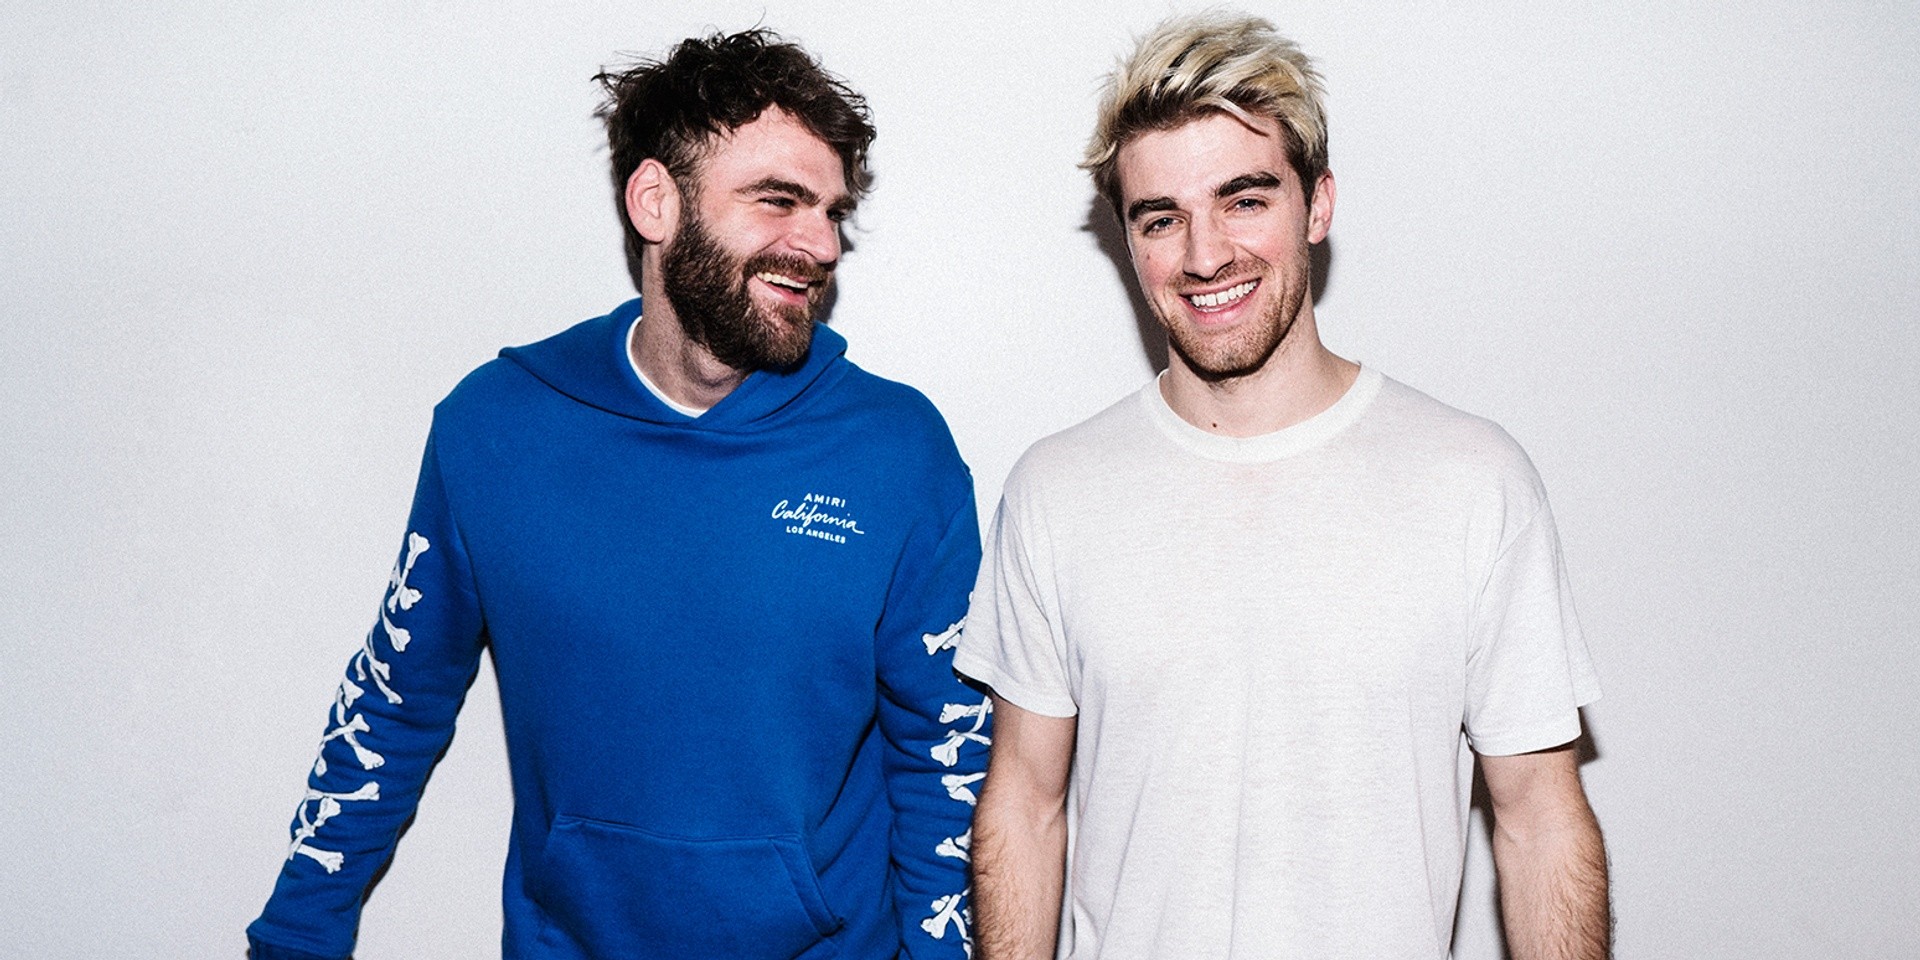 The Chainsmokers are returning to Manila this August